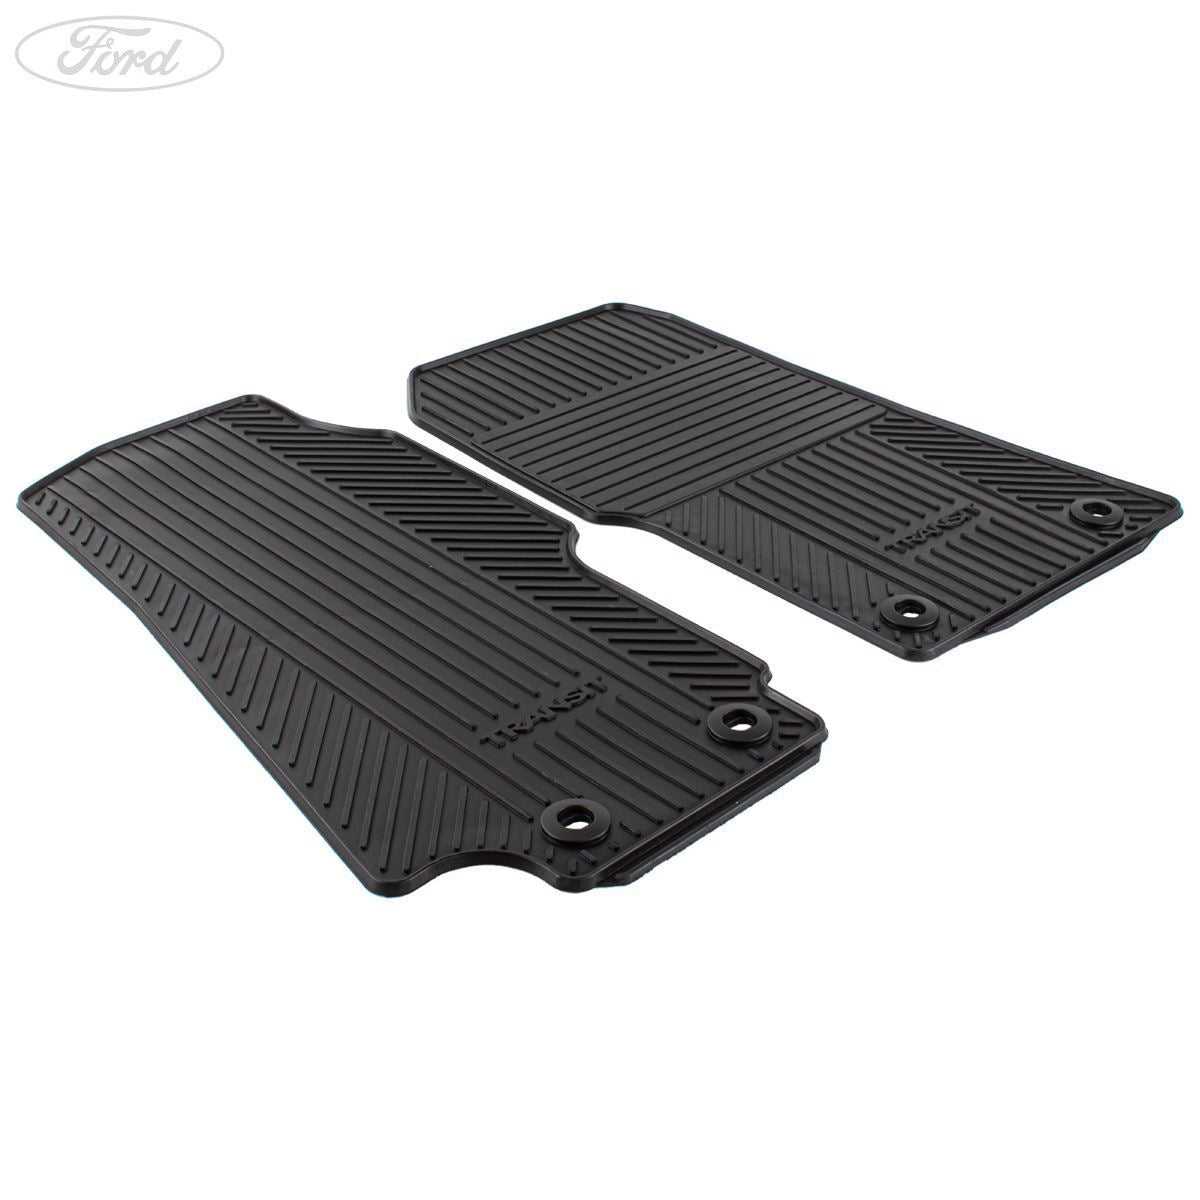 Ford, TRANSIT MK7 FRONT RUBBER FLOOR MATS SET WITH LOGO 2006-2014